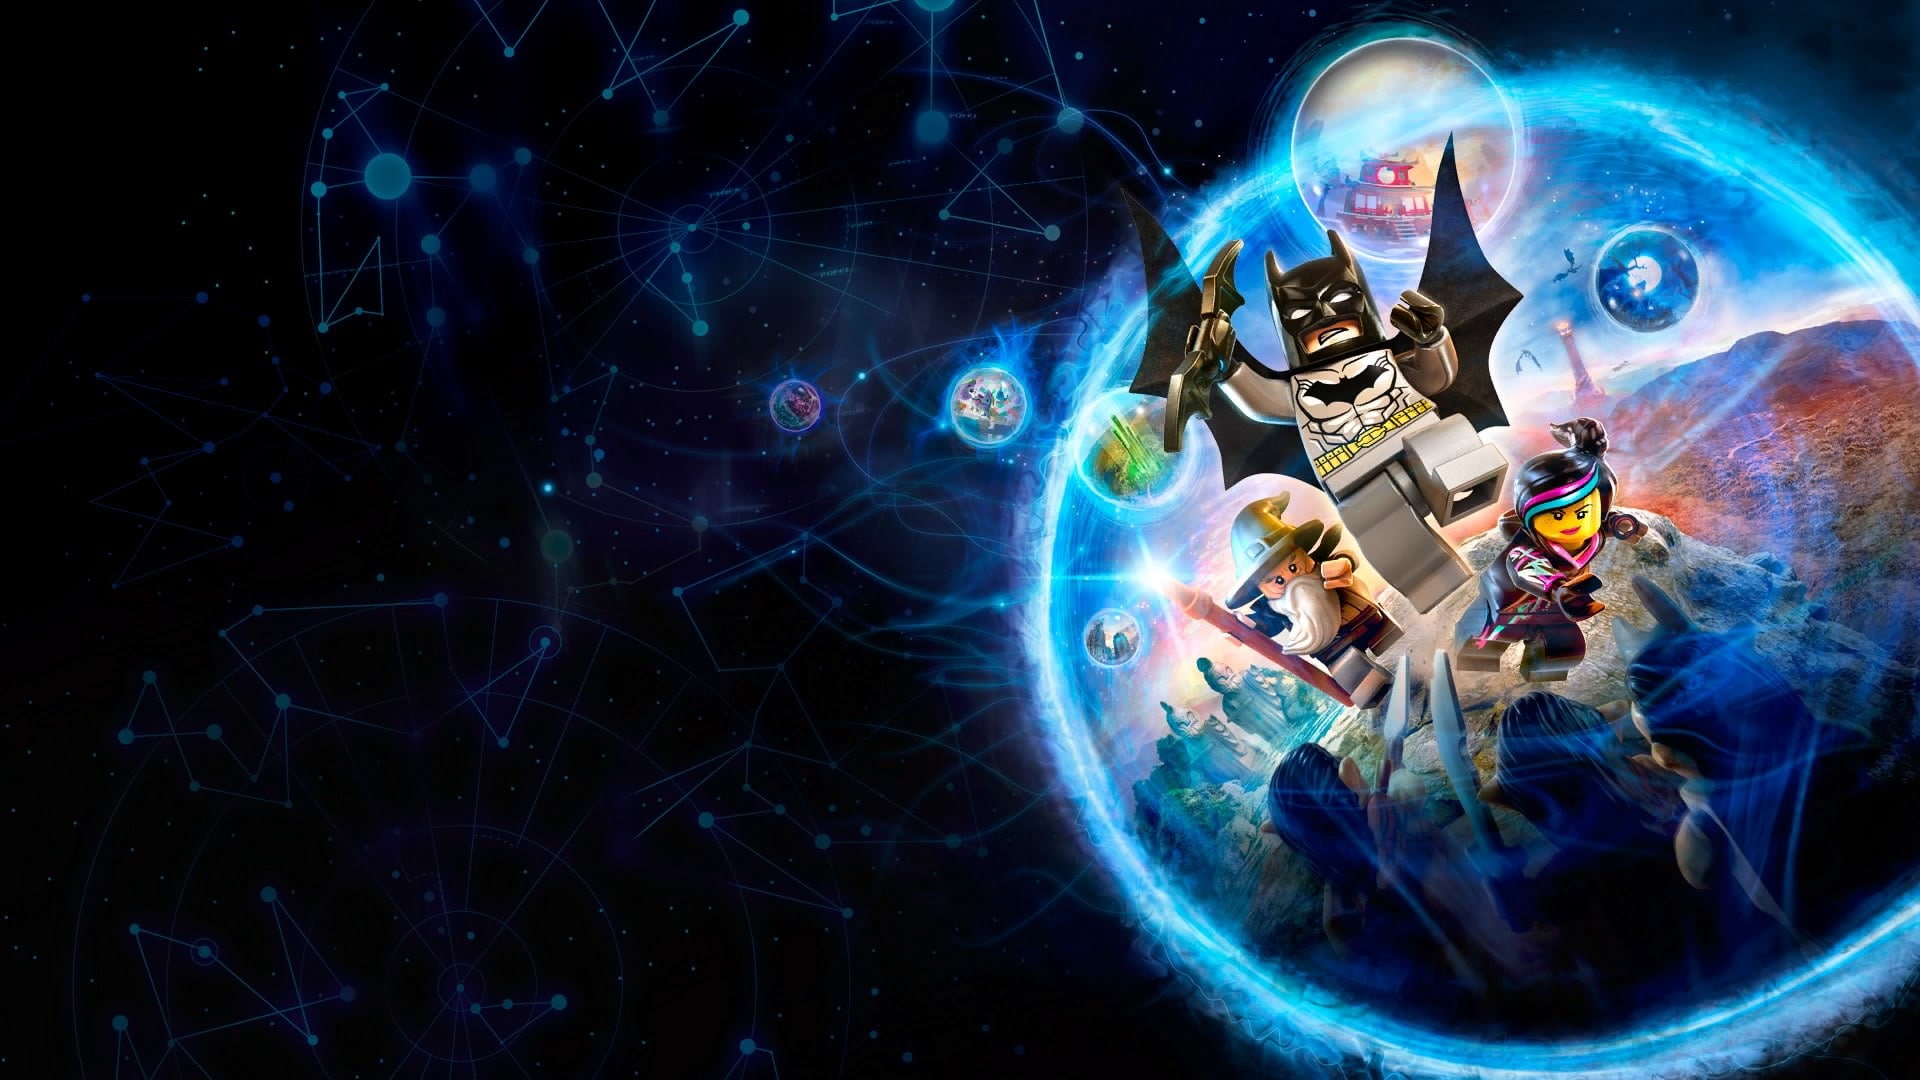 lego dimensions, technology, space, sphere, communication, planet - space